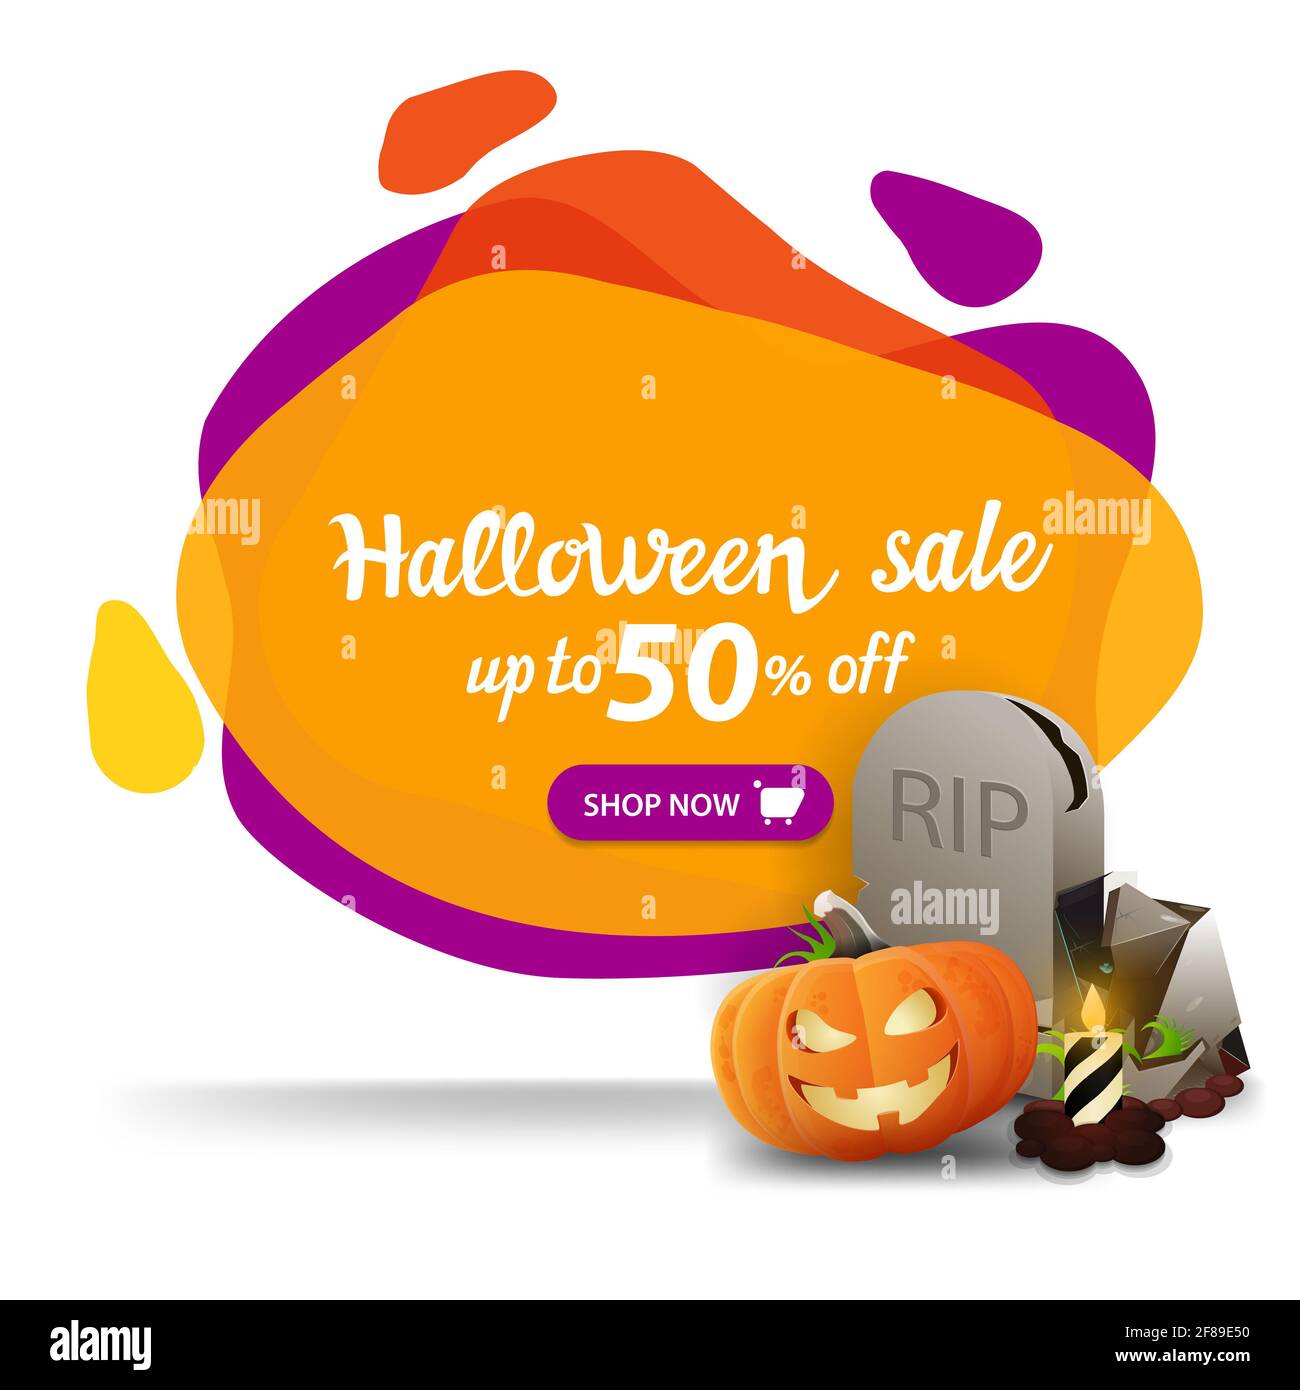 Halloween sale, up to 50 off, creative colorful banner with dynamic liquid shapes Stock Photo